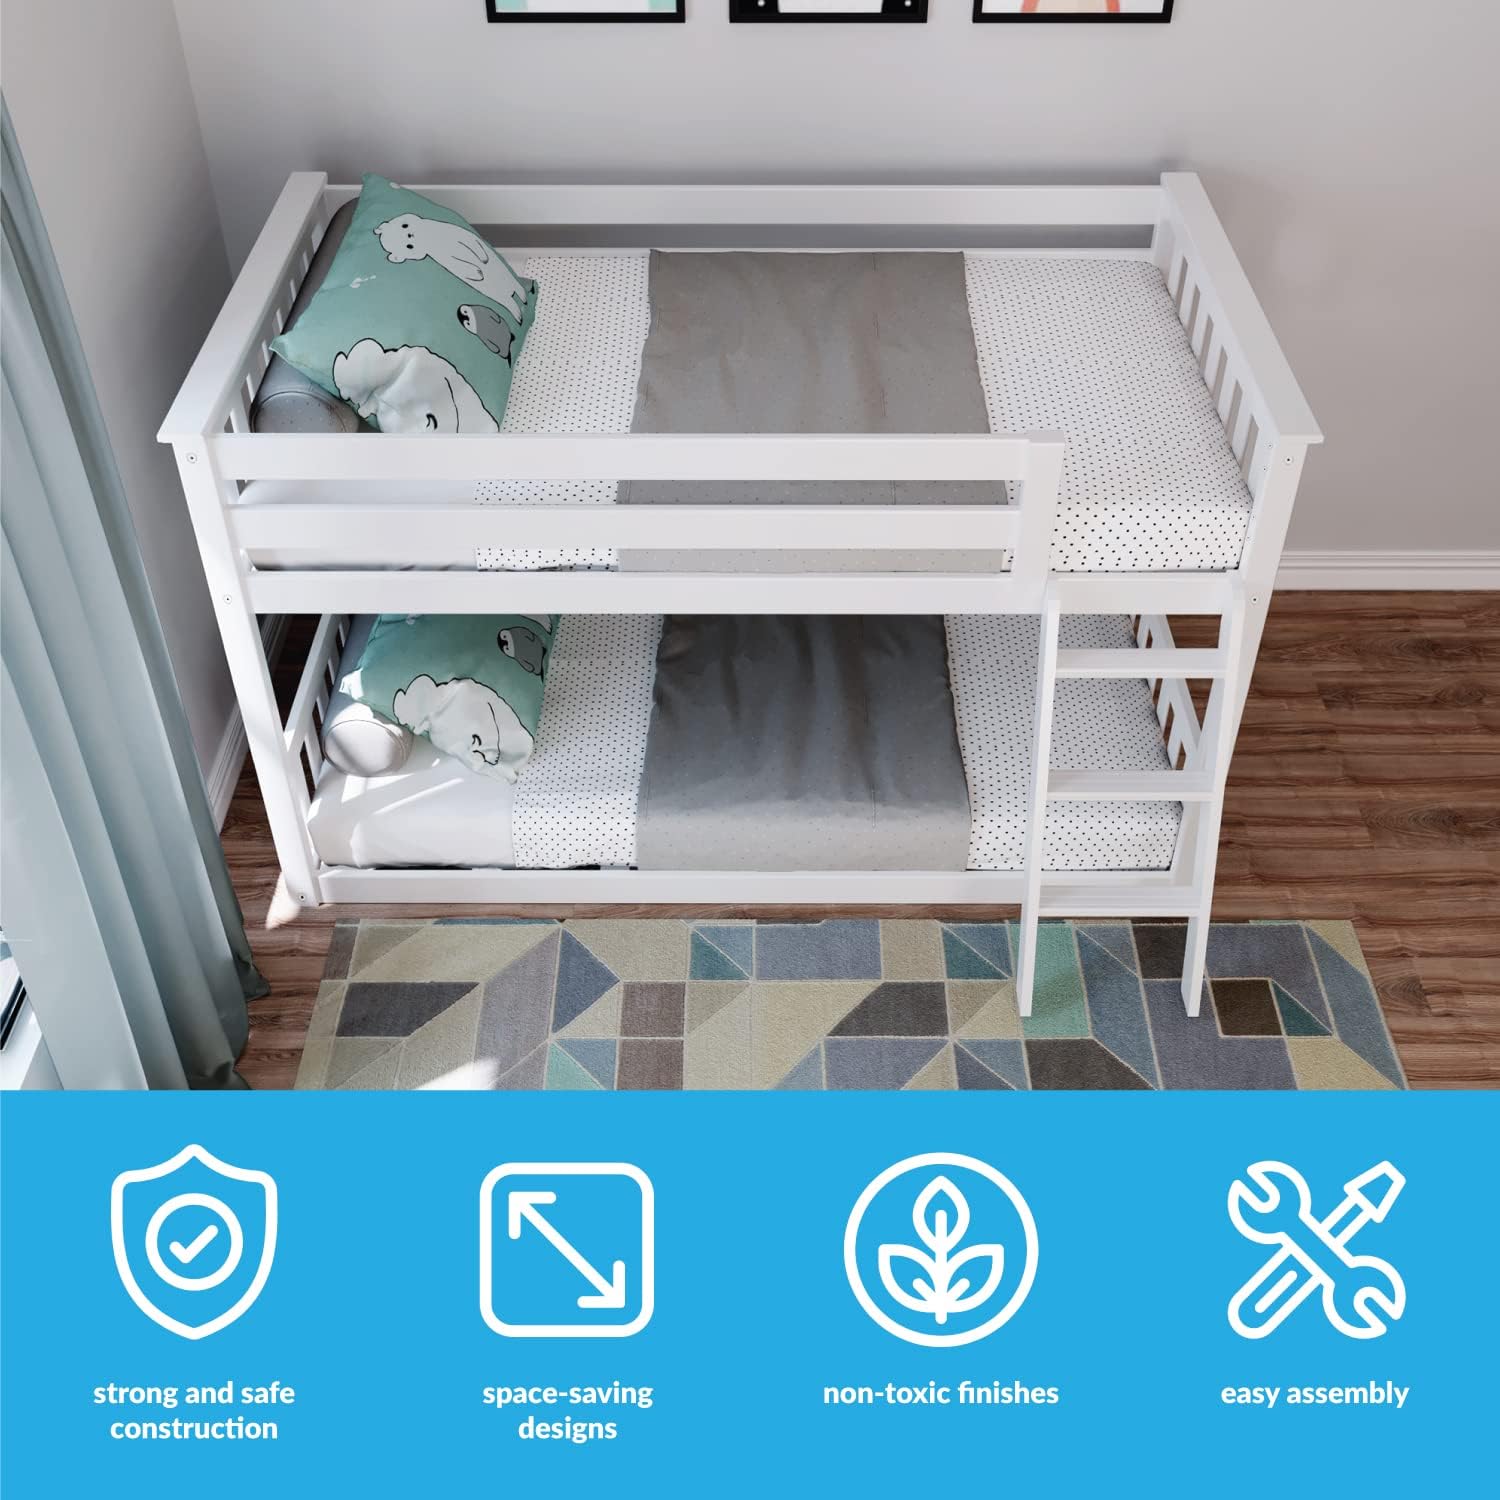 Max & Lily Twin Over Twin Low Bunk Bed with Ladder, Wooden Bunk beds - $240